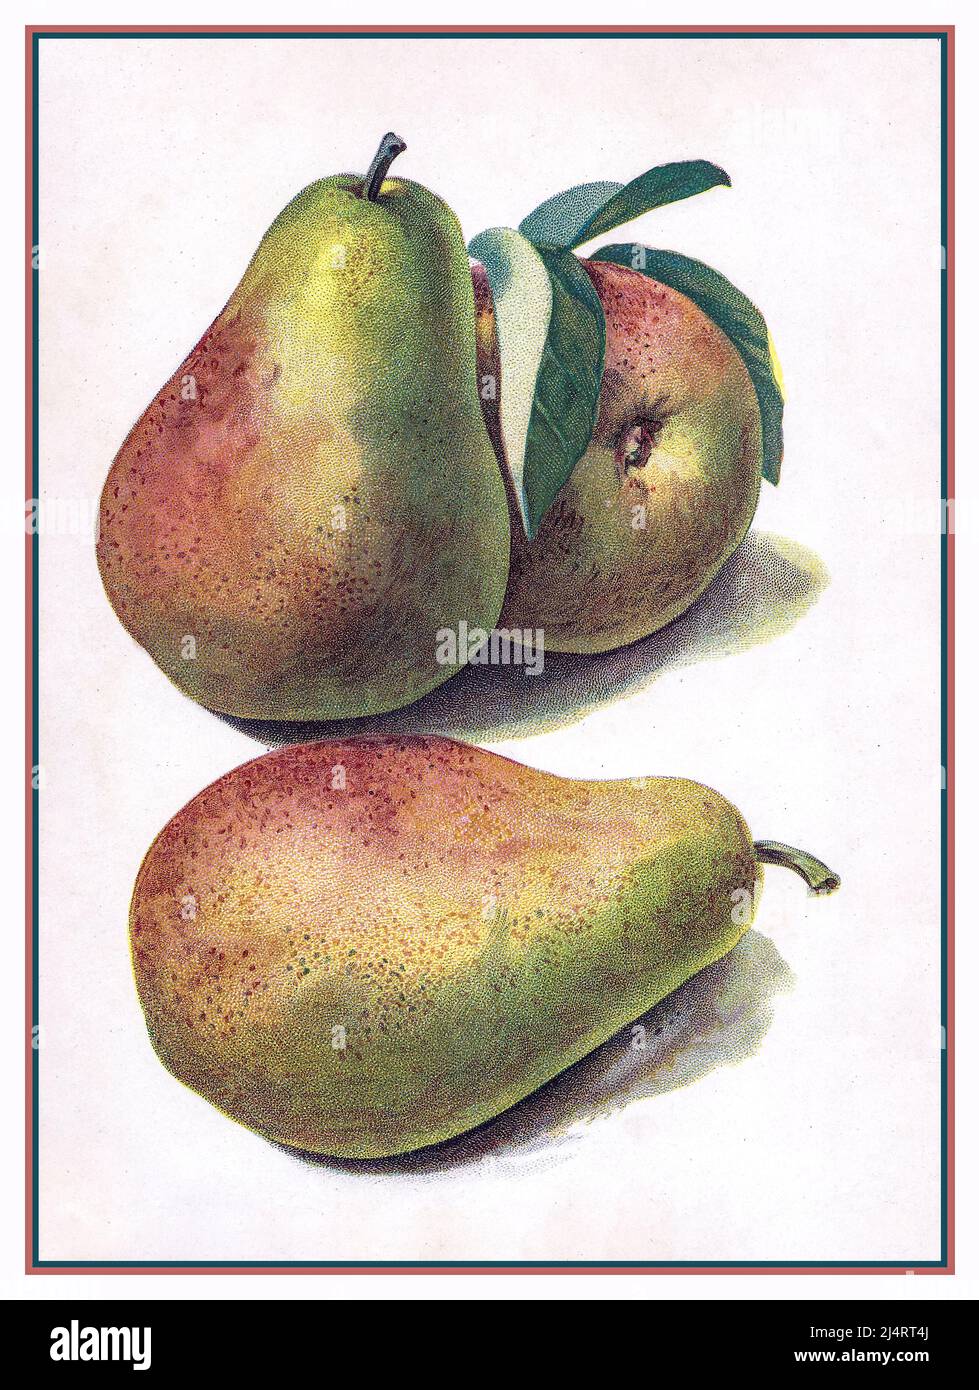 PEAR PEARS ILLUSTRATION Vintage Lithograph Pear, CLAPPS FAVOURITE, Pear, FAYETTE BEAUTY. Illustration Fruit Stock Photo